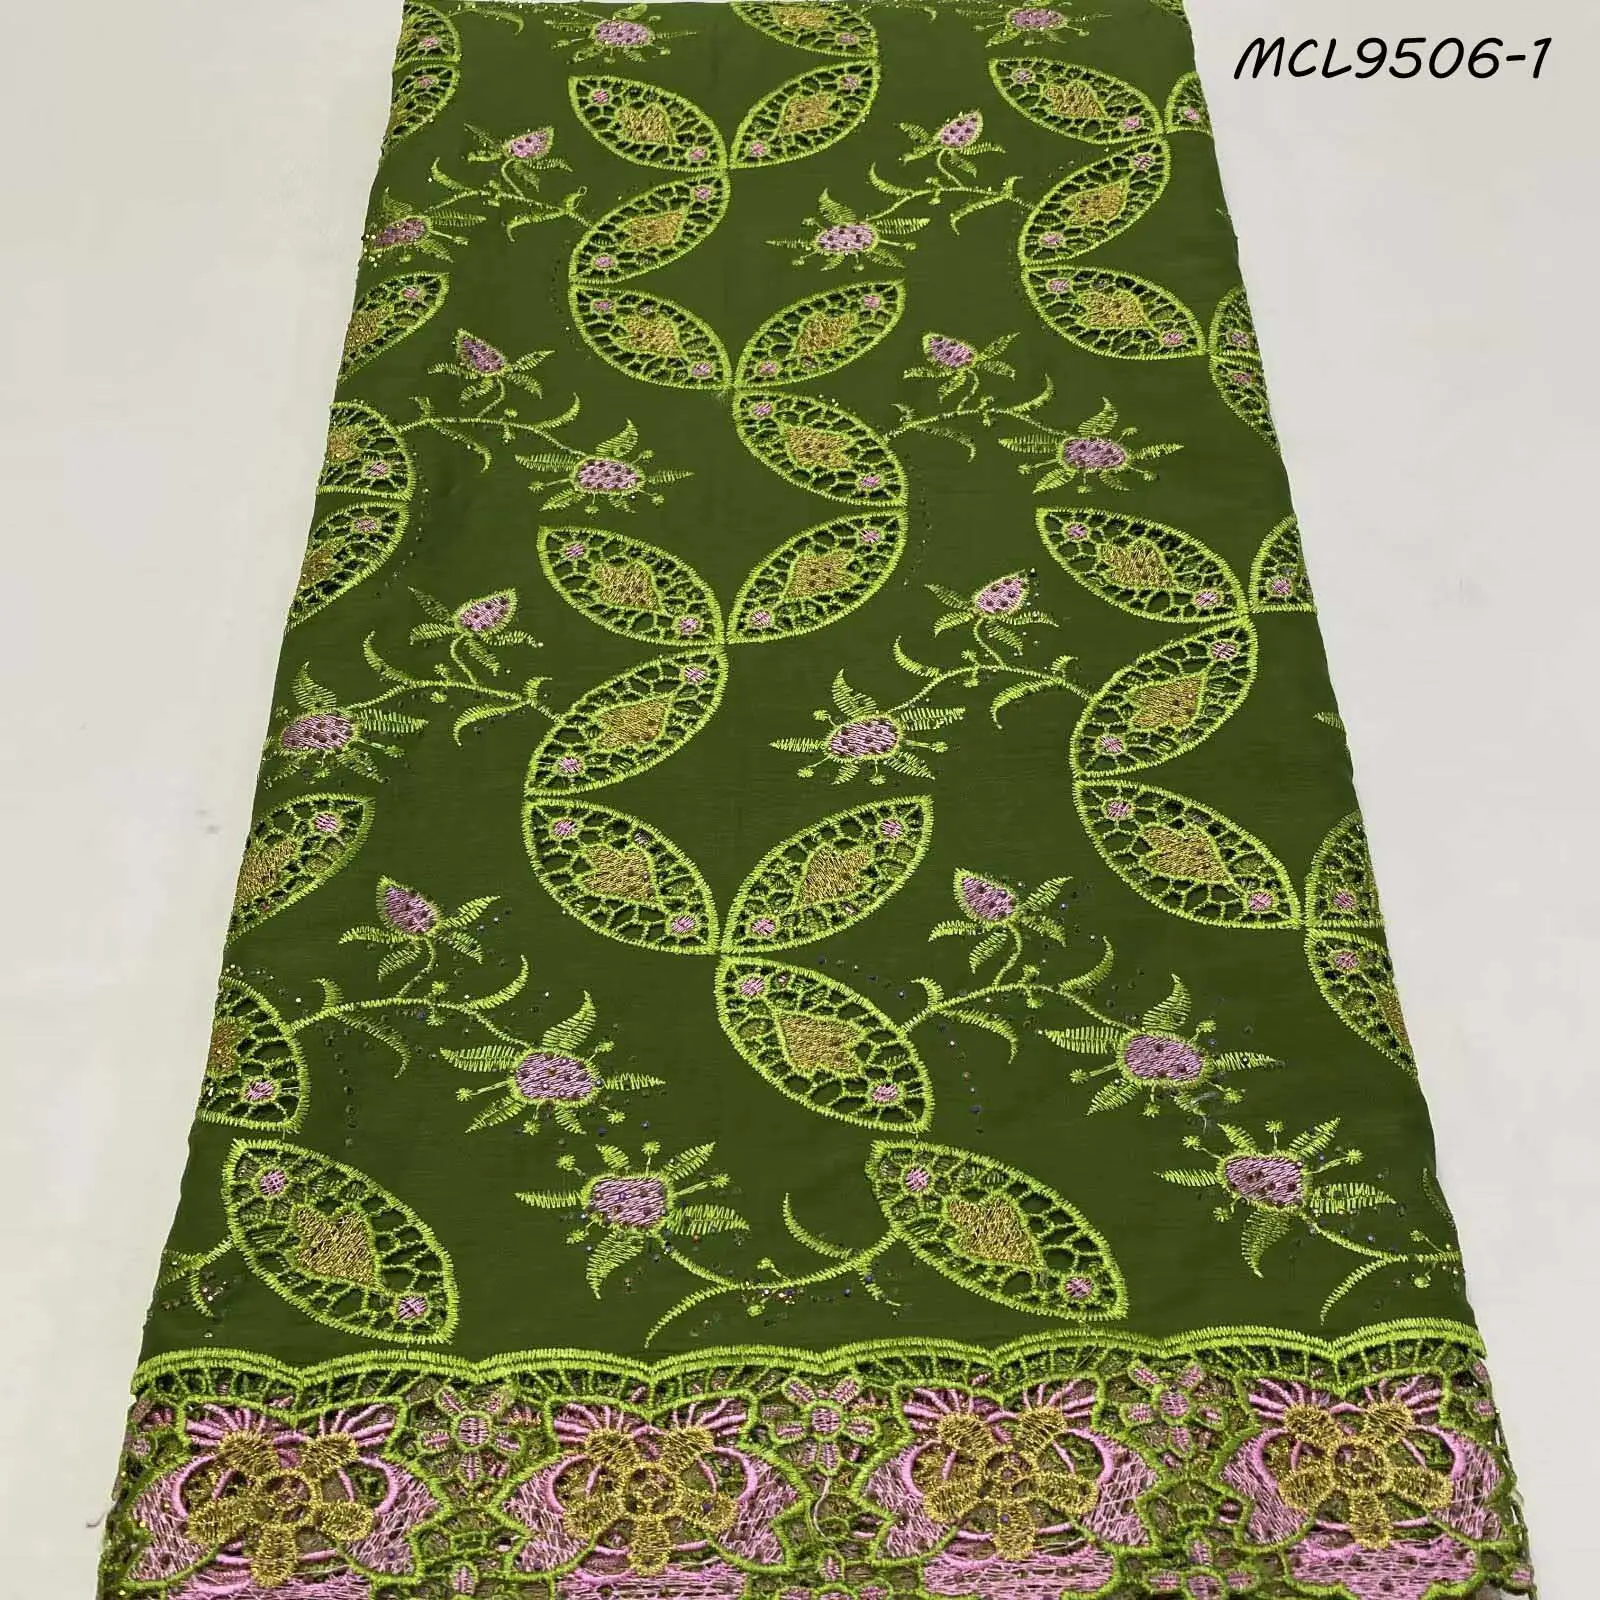 A natural highlight on the lace front Multi-color embroidered lace with full floor diamonds 5yards